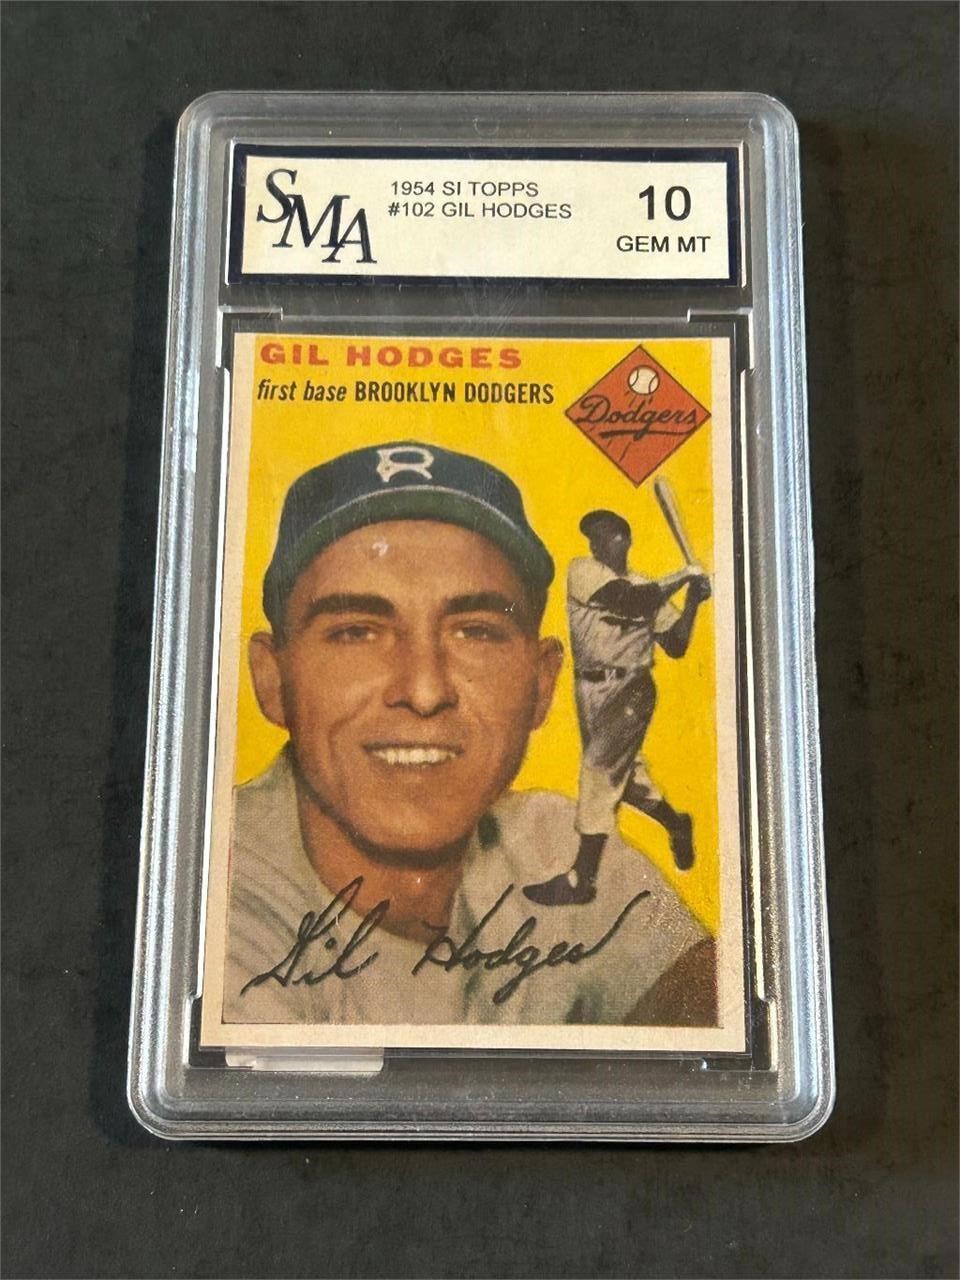 1950s Topps & Vintage Sports Cards - Ends TUE 6/25 9PM CST